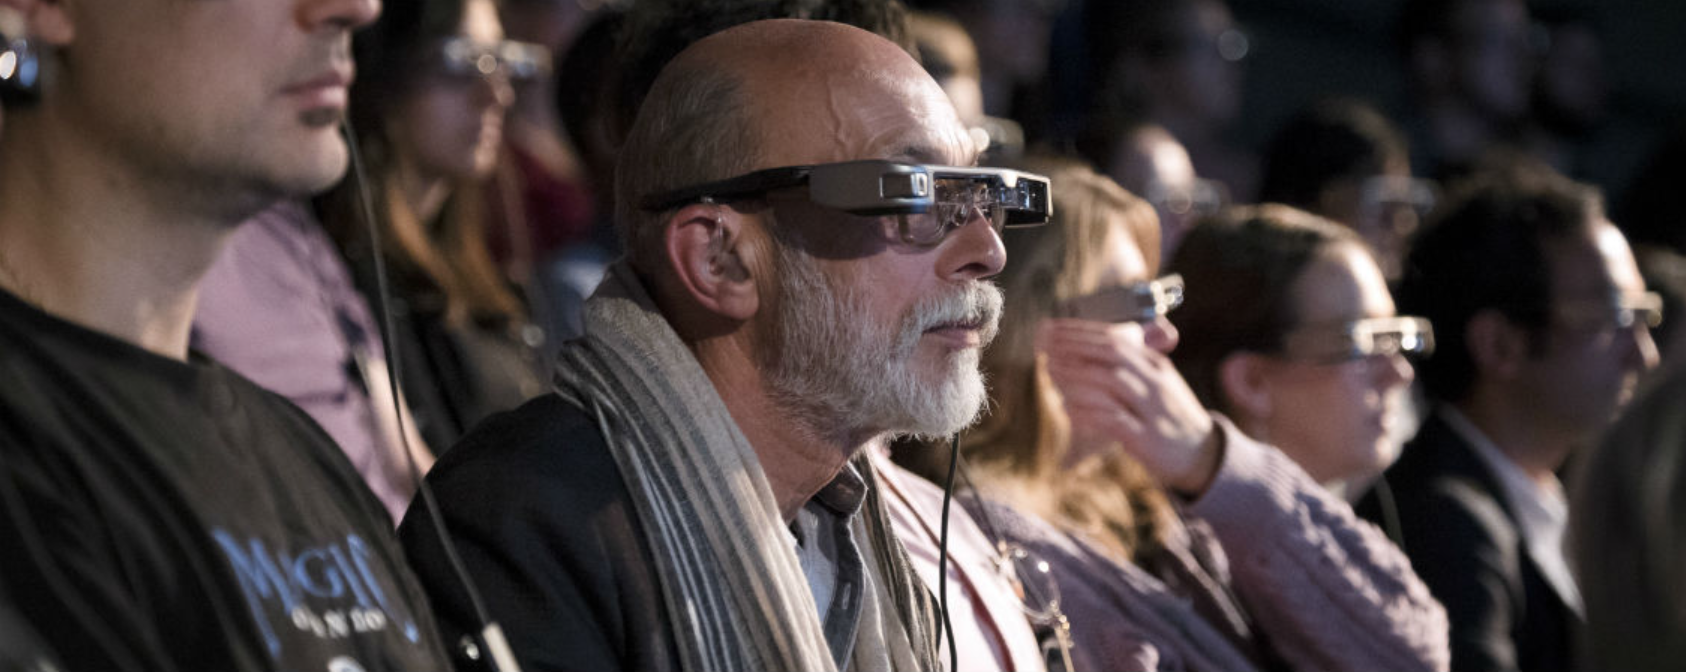 theatre audience wearing smart caption glasses